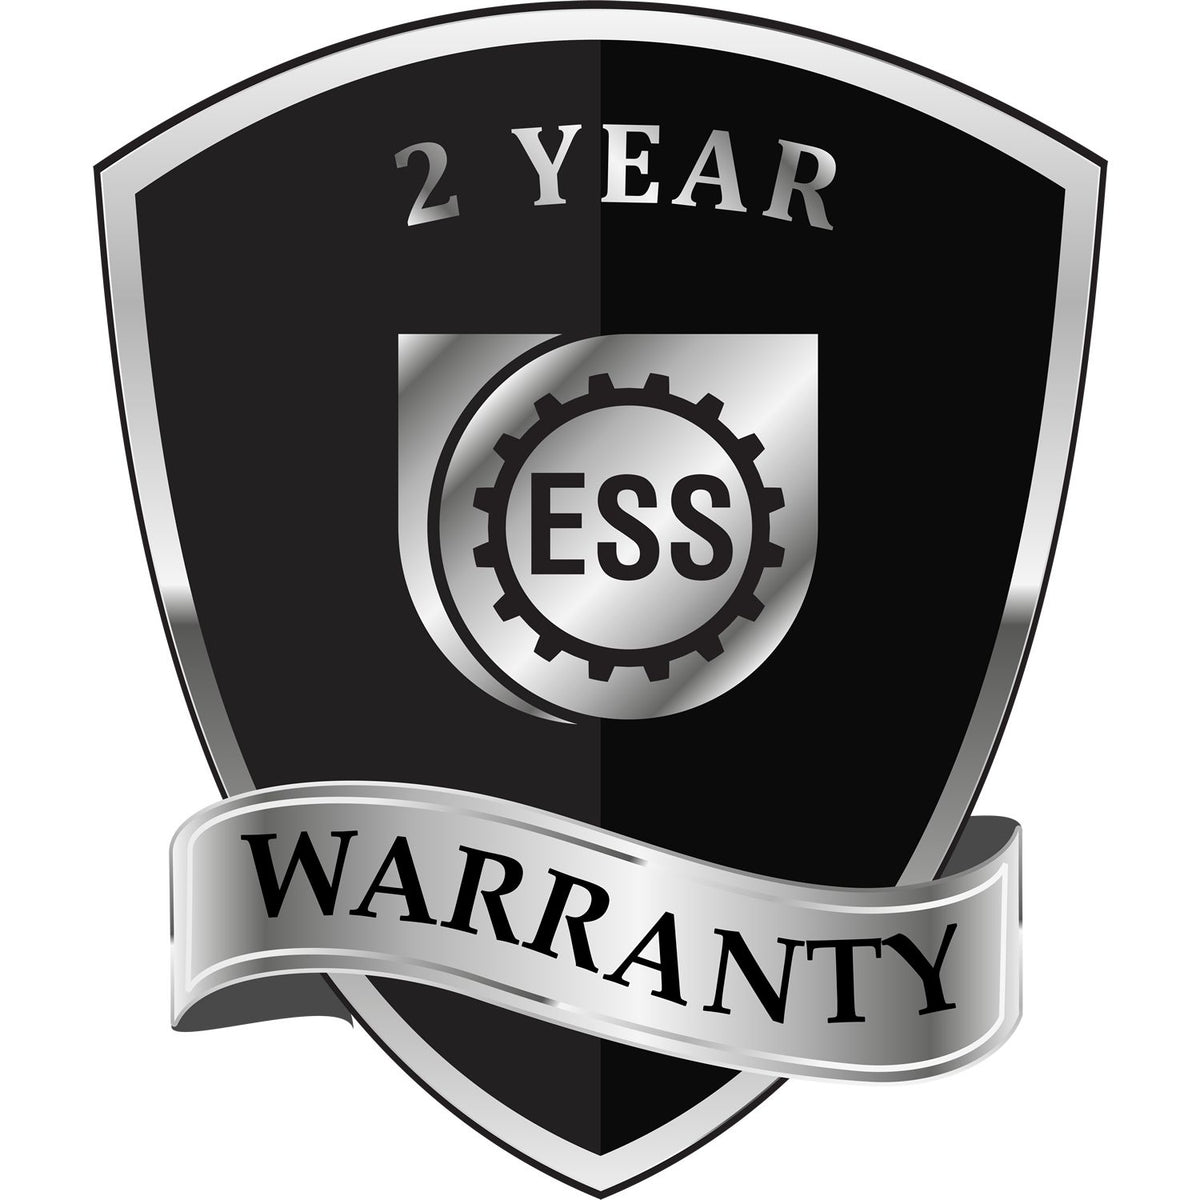 A black and silver badge or emblem showing warranty information for the Soft Tennessee Professional Geologist Seal